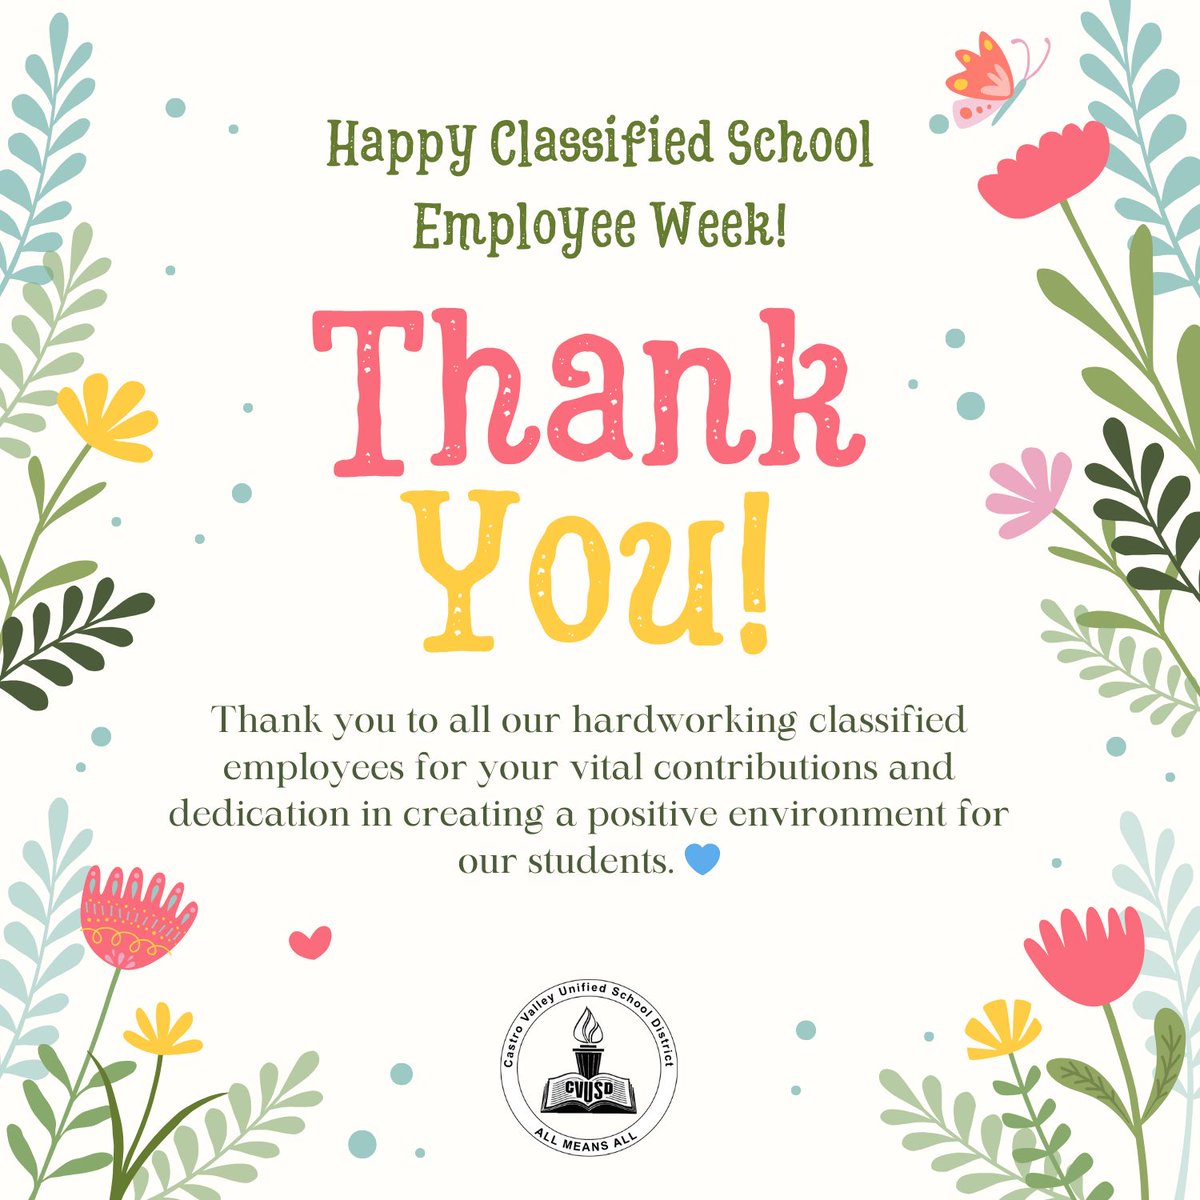 🎉Celebrating Classified School Employee Week! 🍎 Thank you to all the unsung heroes working behind the scenes to support students, teachers, and schools. Your dedication and hard work do not go unnoticed! 👏 #ClassifiedSchoolEmployeeWeek #EducationHeroes #ThankYou